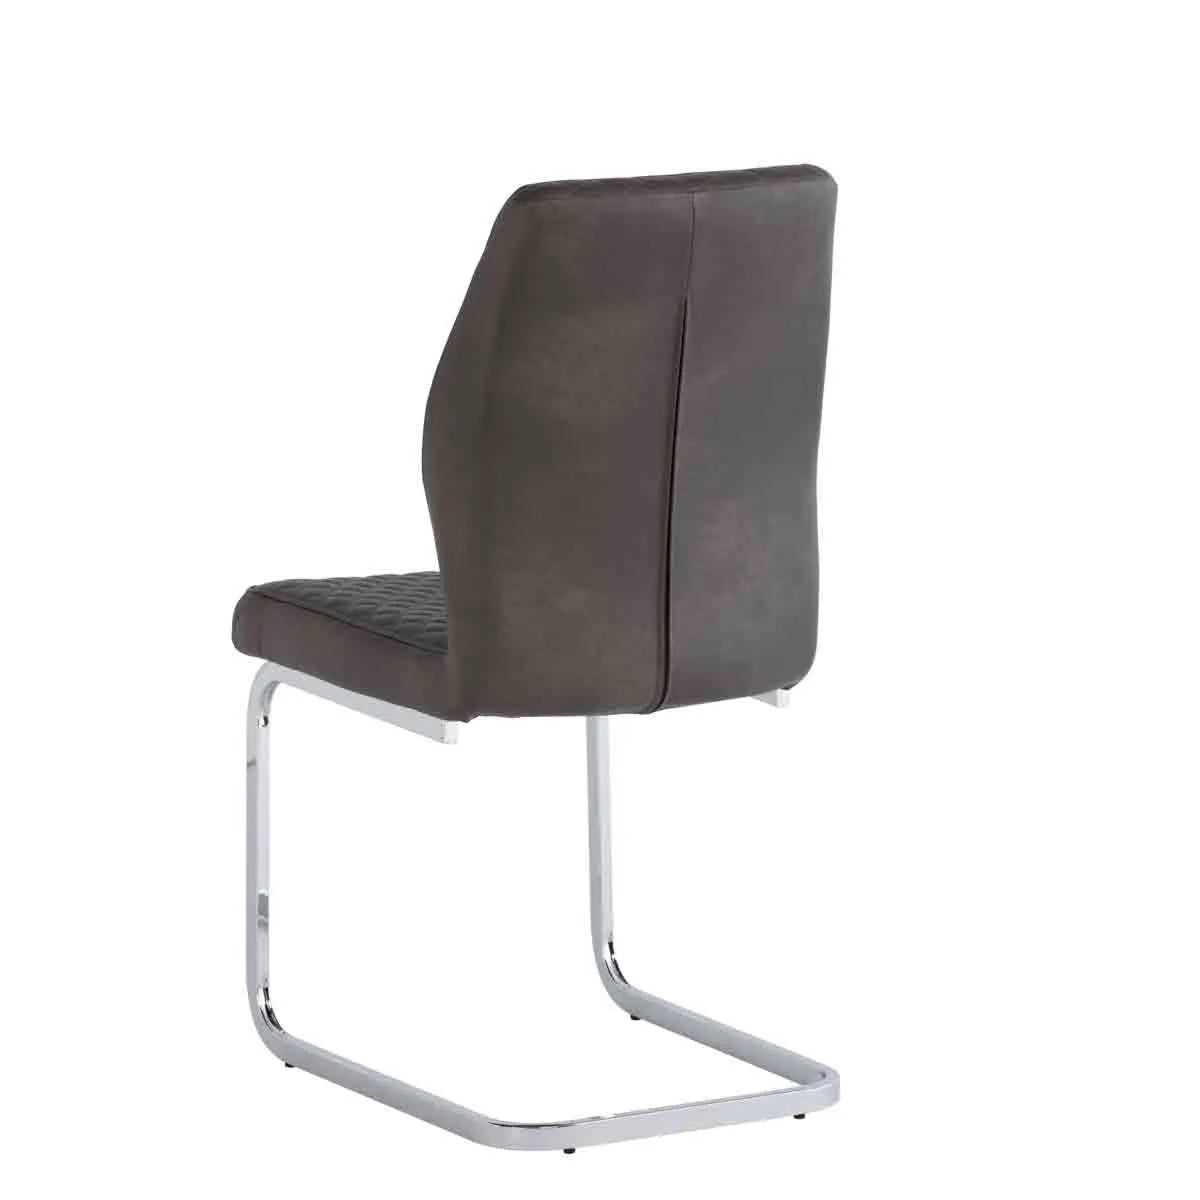 Capri Dining Chair - Taupe